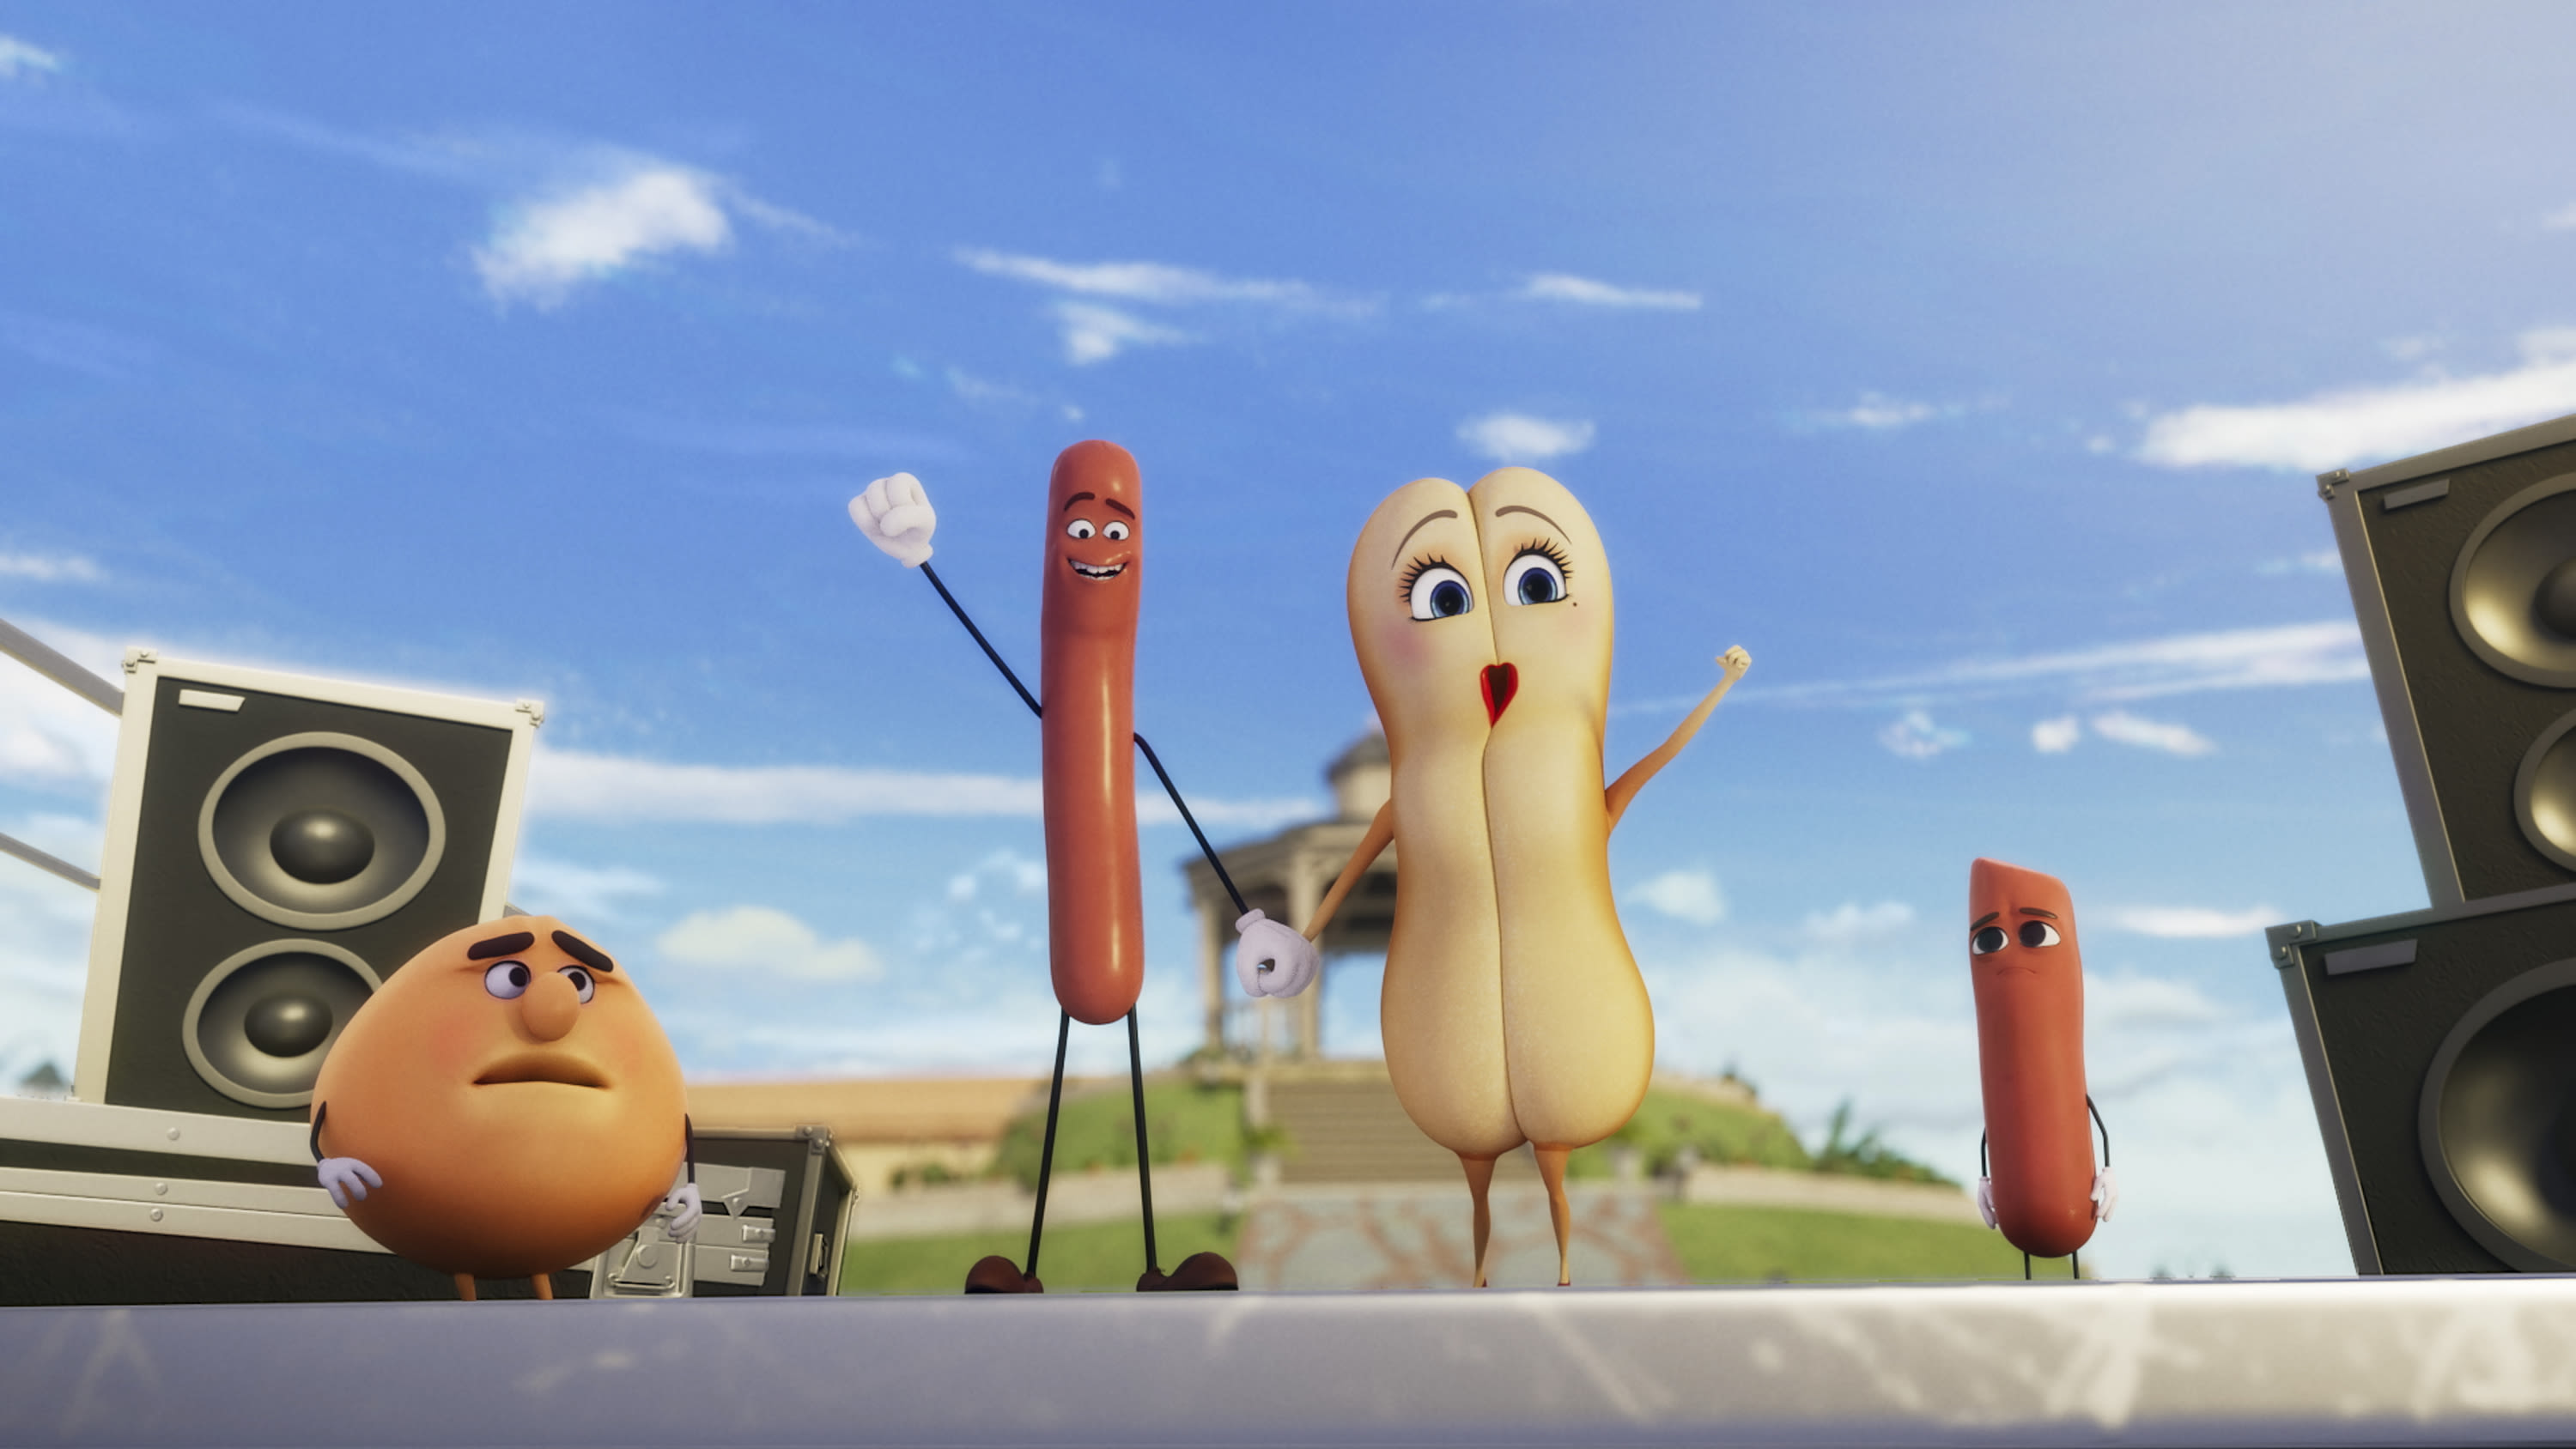 Review: Adult cartoons 'Sausage Party' and 'Exploding Kittens,' one charming, one (purposely) not